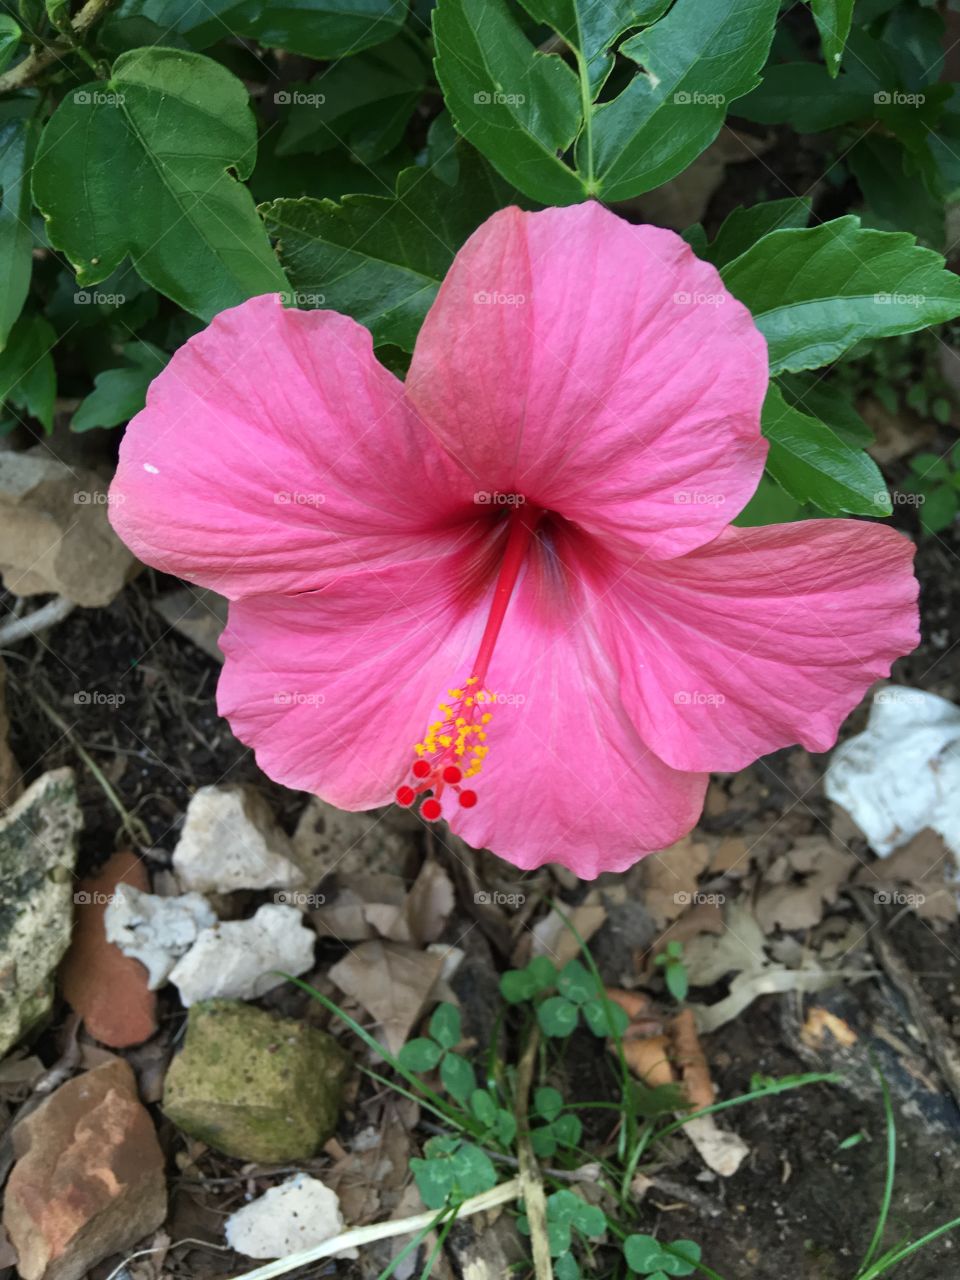 This is in one of my flower gardens in the front yard. This is the first bloom of the year!